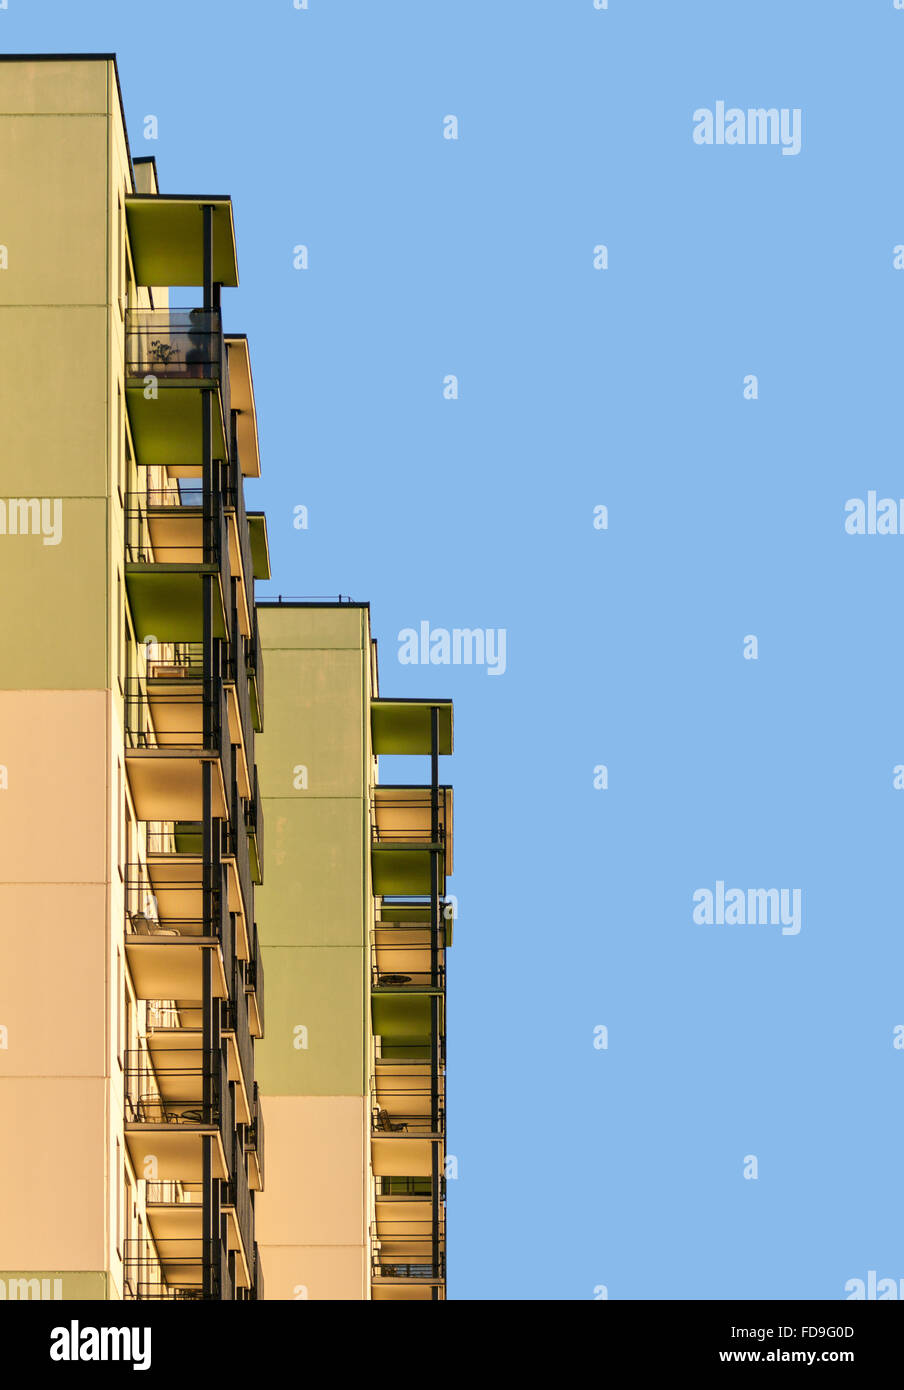 Abstract picture of modern apartment building with balconies against blue sky Stock Photo